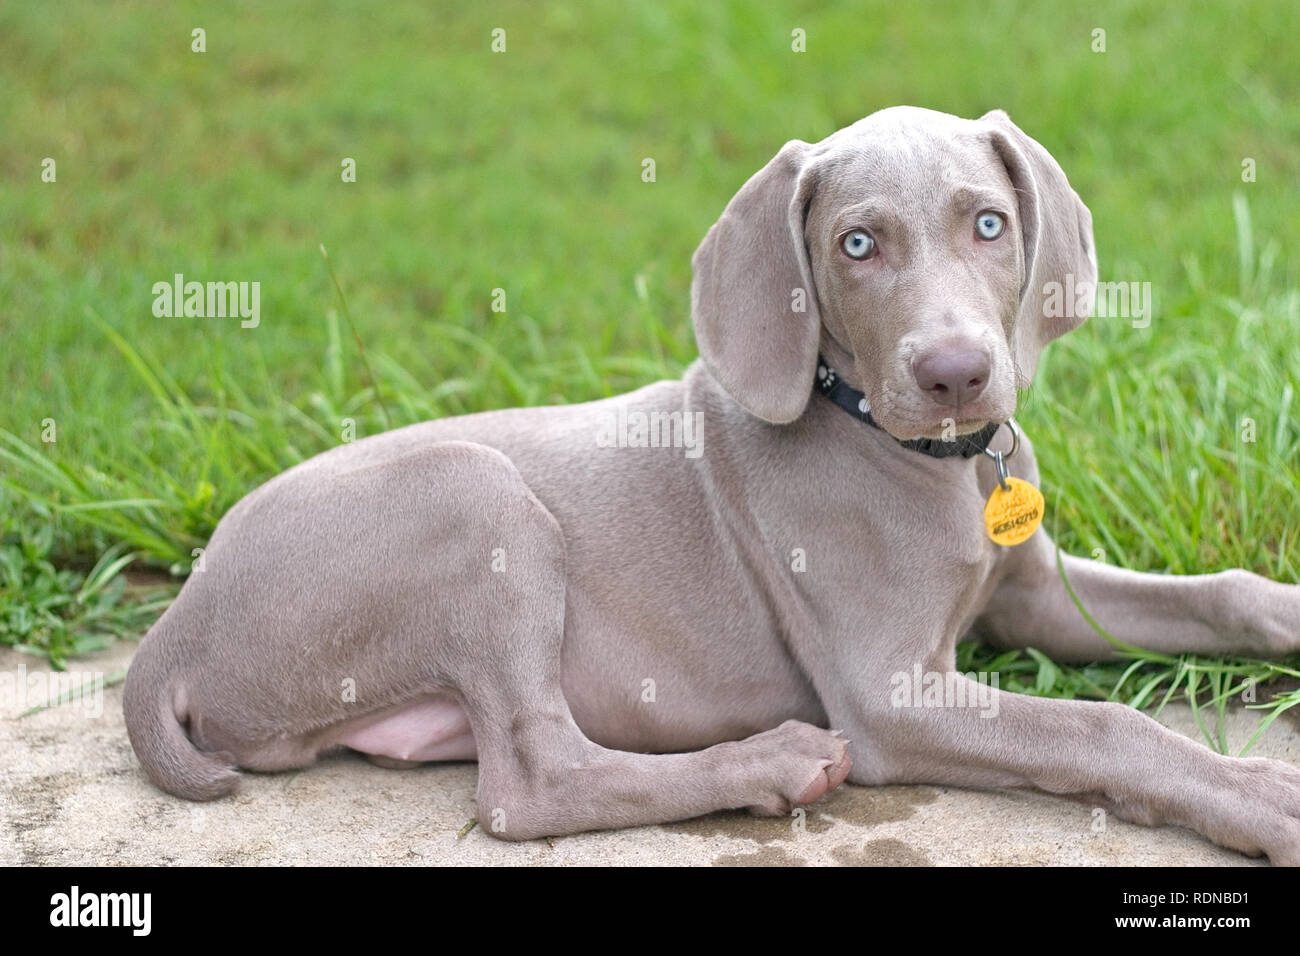 A Weimaraner puppy resting in the grass Stock Photo